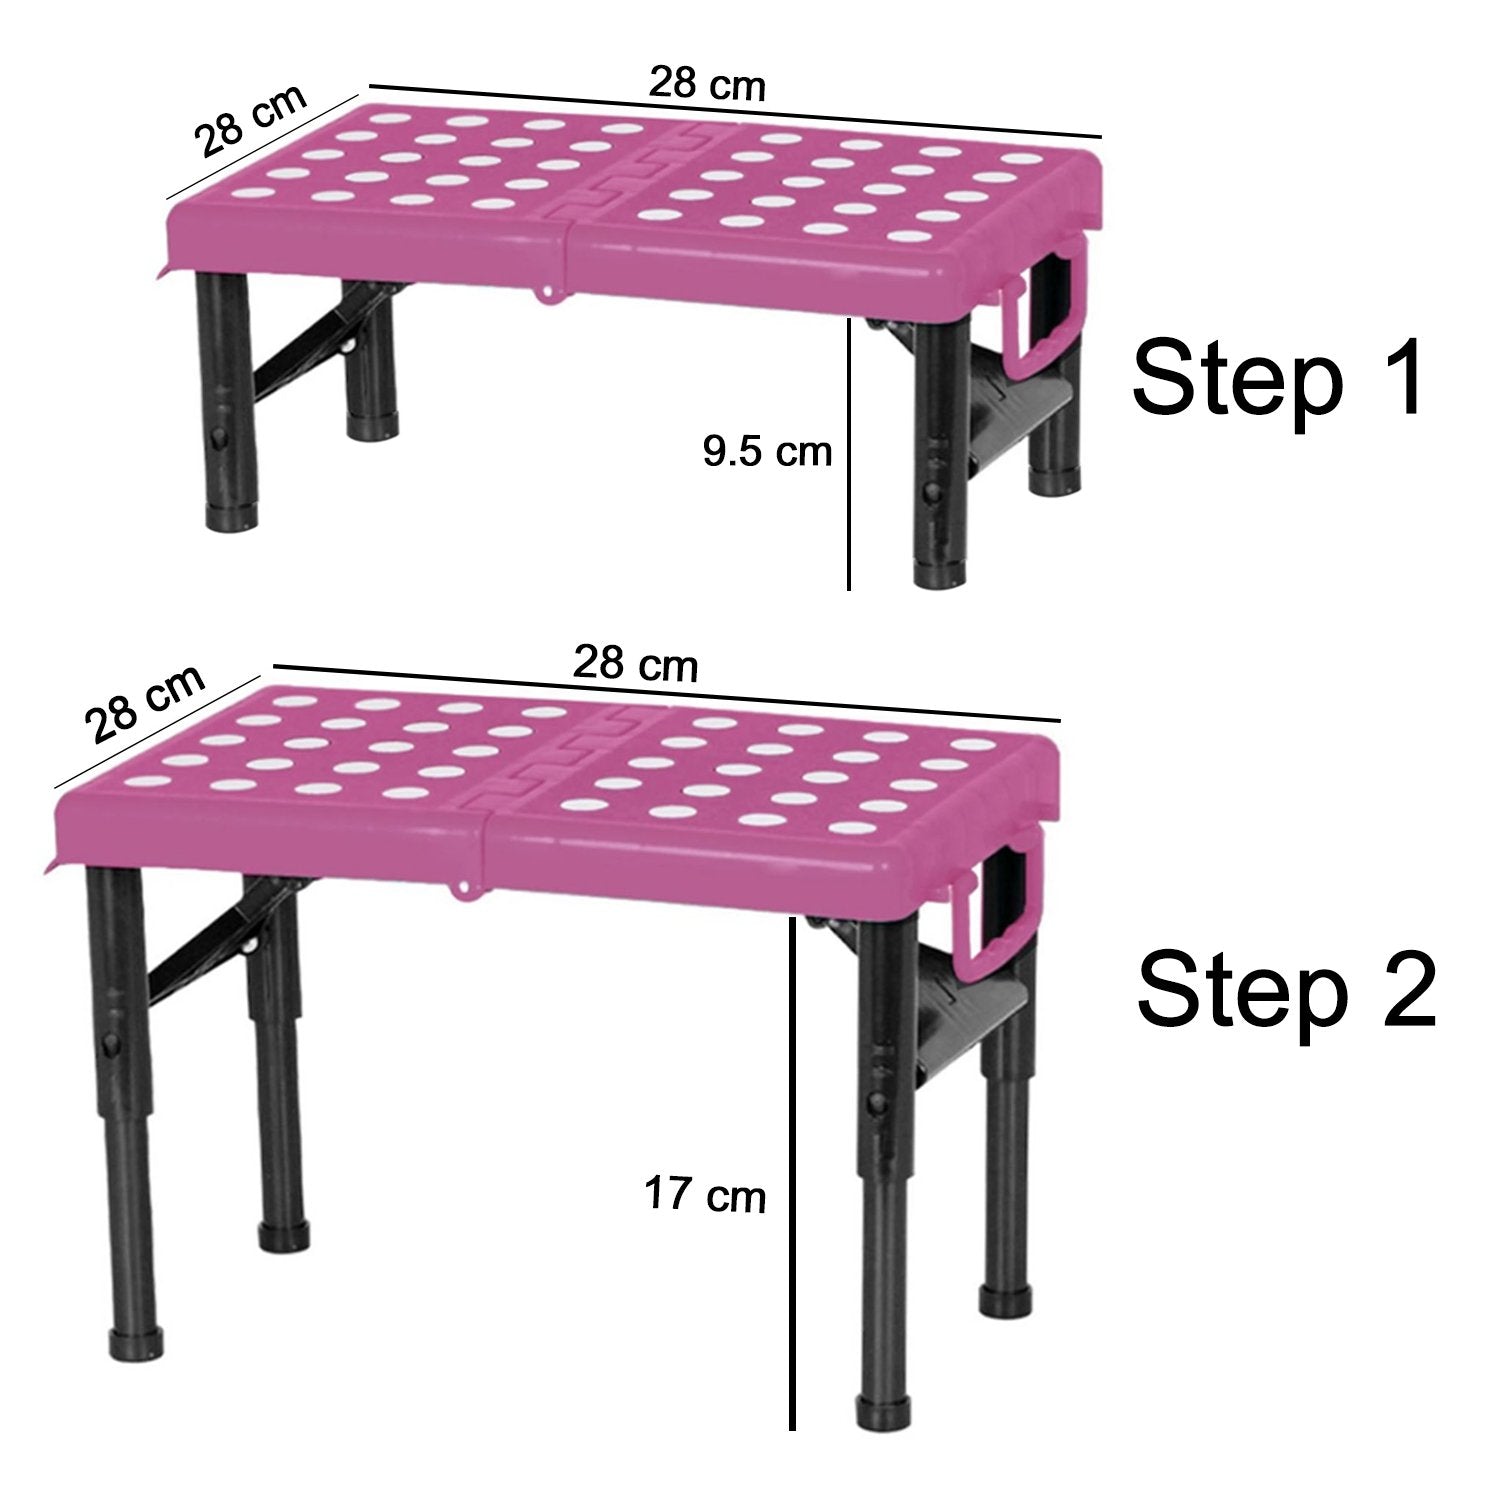 2431 High Quality Multi-Utility Compact Foldable Table